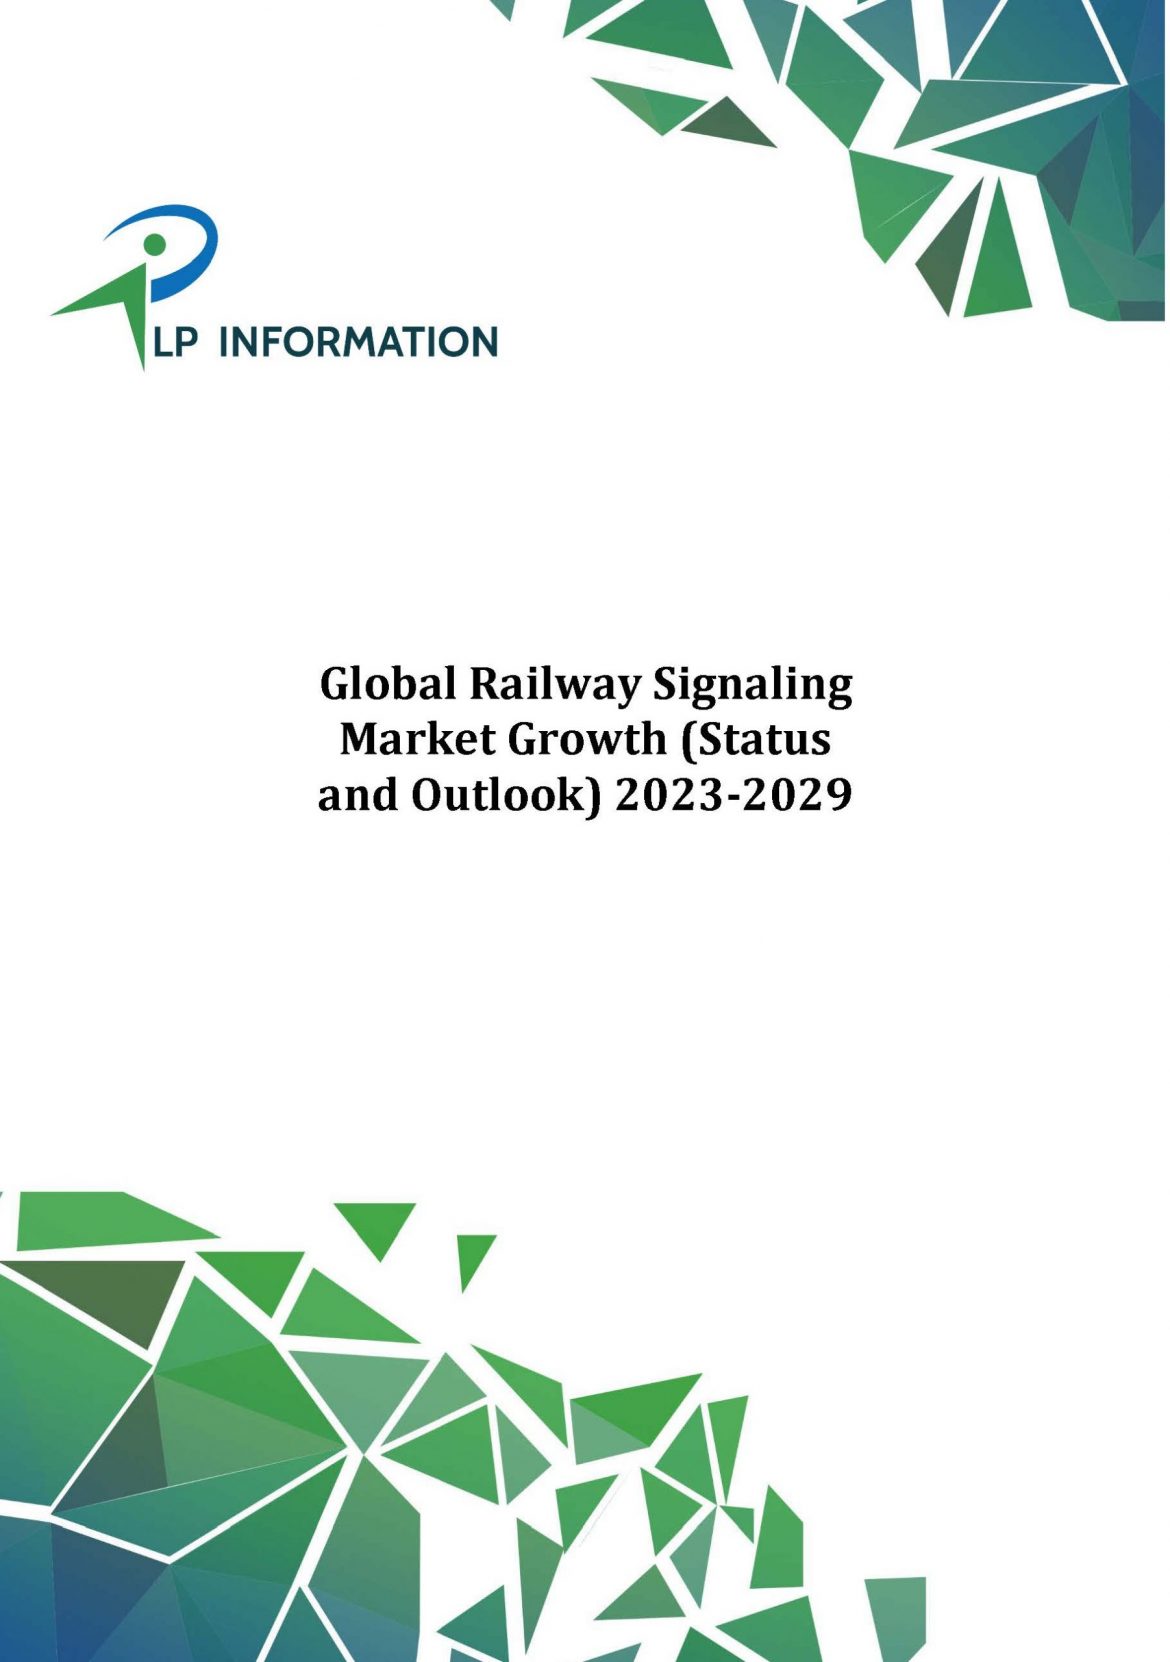 Global Railway Signaling Market Growth (Status and Outlook) 2023-2029